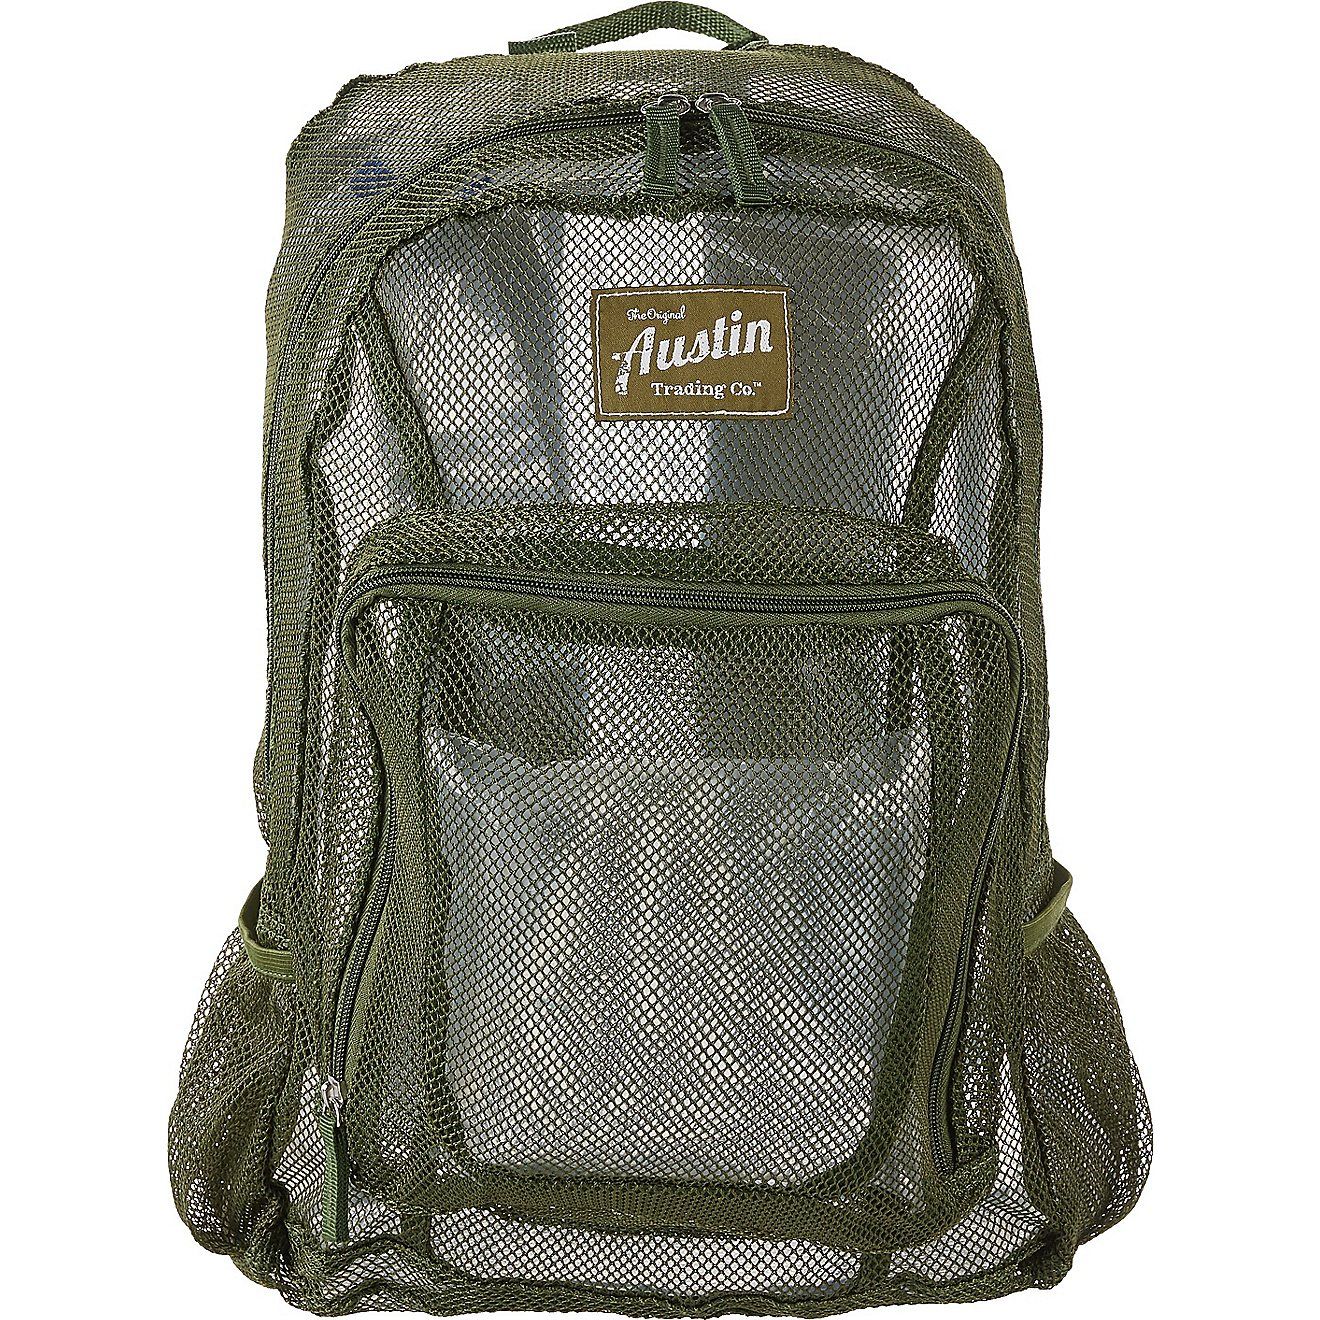 Austin Trading Co.™ Classic Mesh Backpack | Academy Sports + Outdoor Affiliate